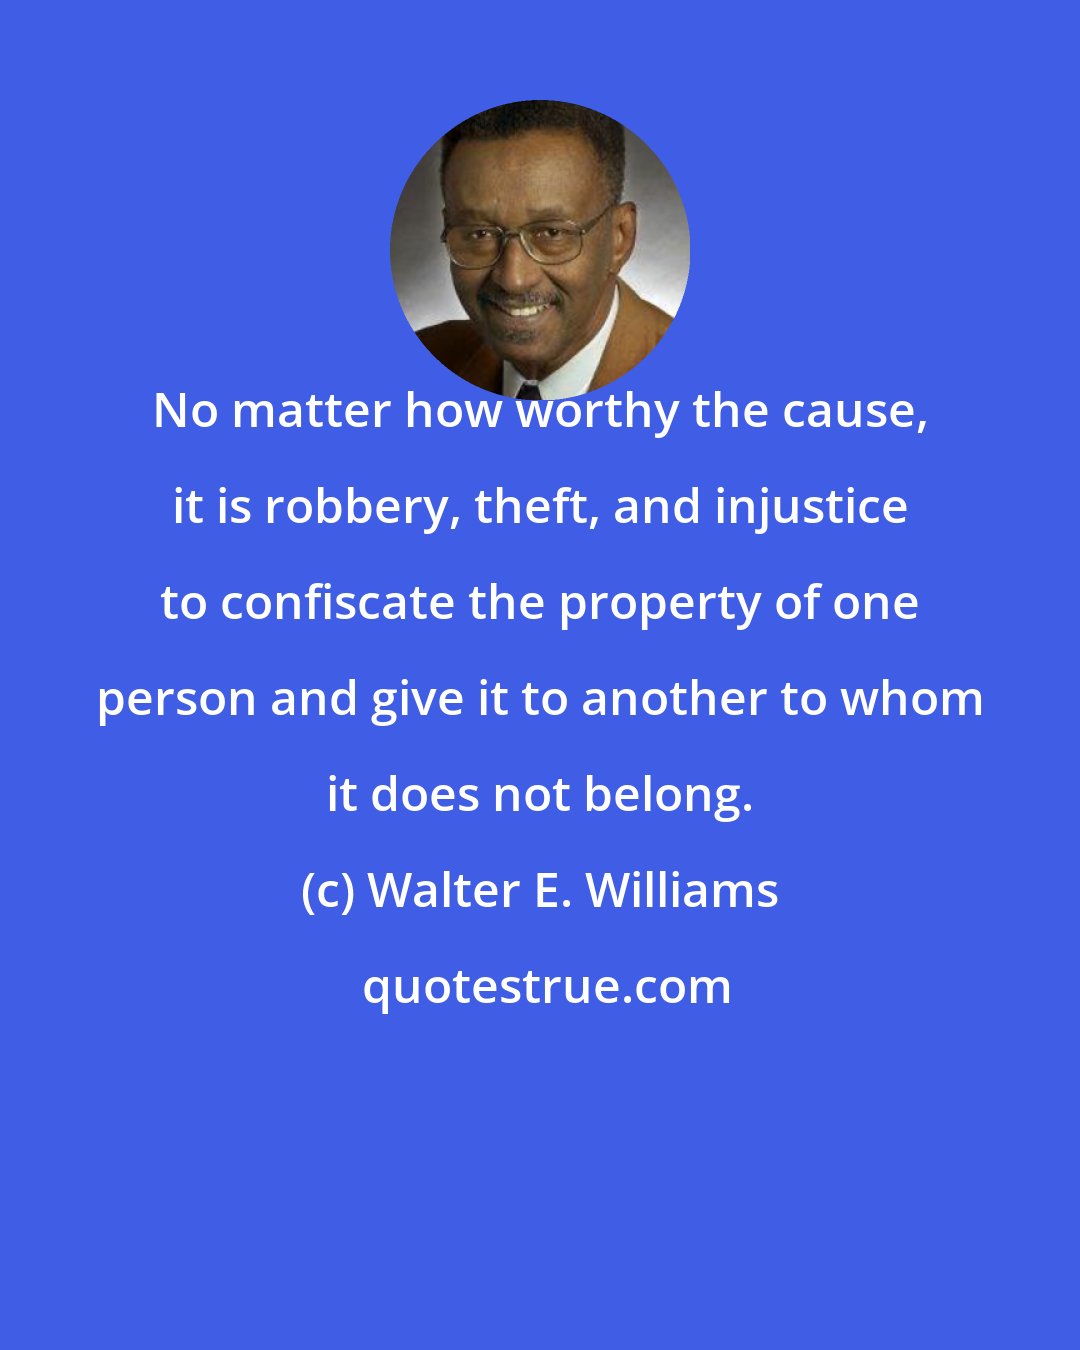 Walter E. Williams: No matter how worthy the cause, it is robbery, theft, and injustice to confiscate the property of one person and give it to another to whom it does not belong.